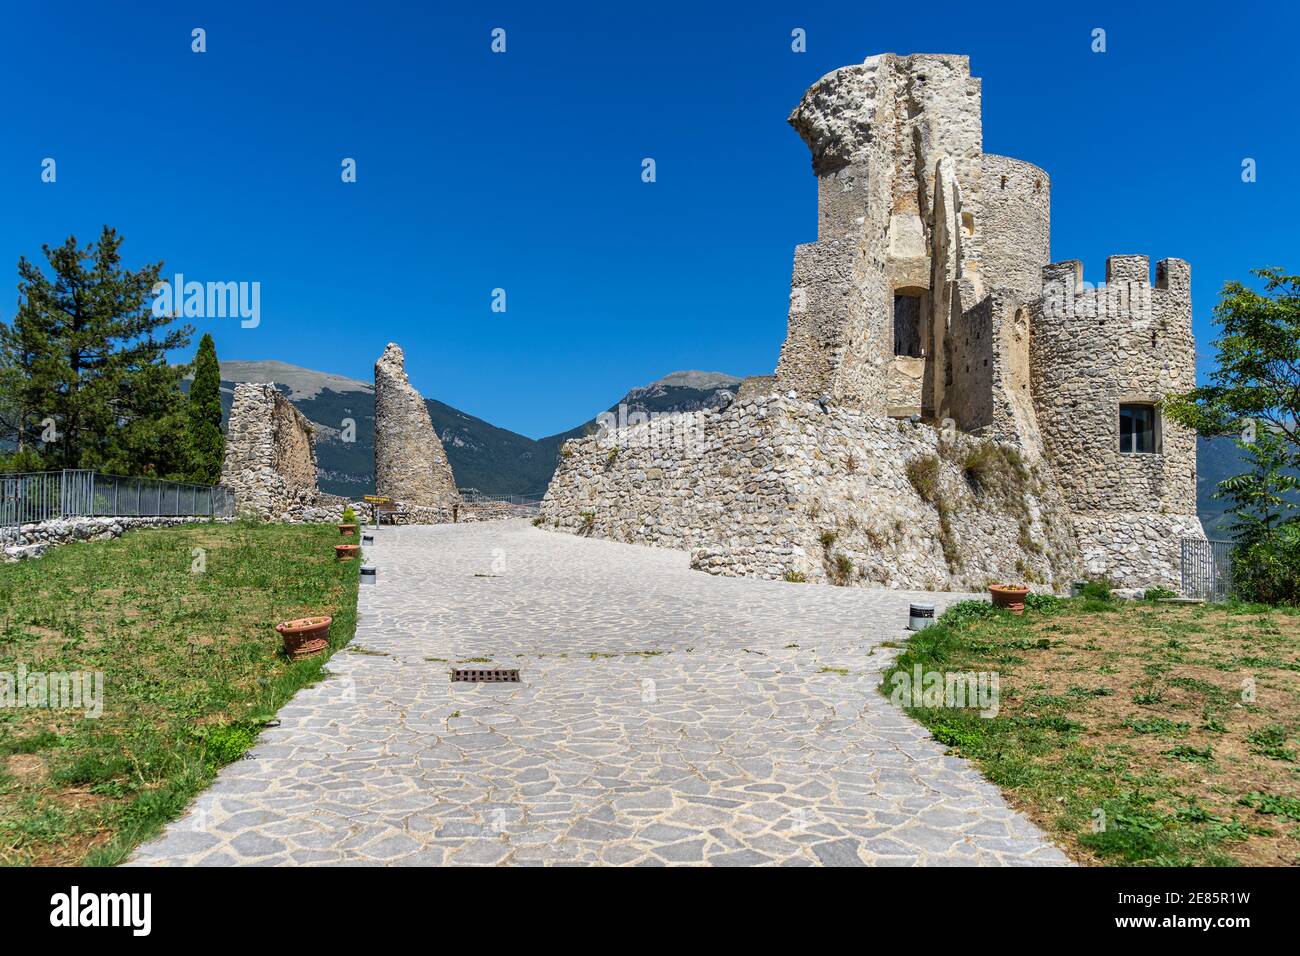 Ruins of the Norman Swabian Castle in Morano Calabro built in 13th century, Calabria Italy Stock Photo